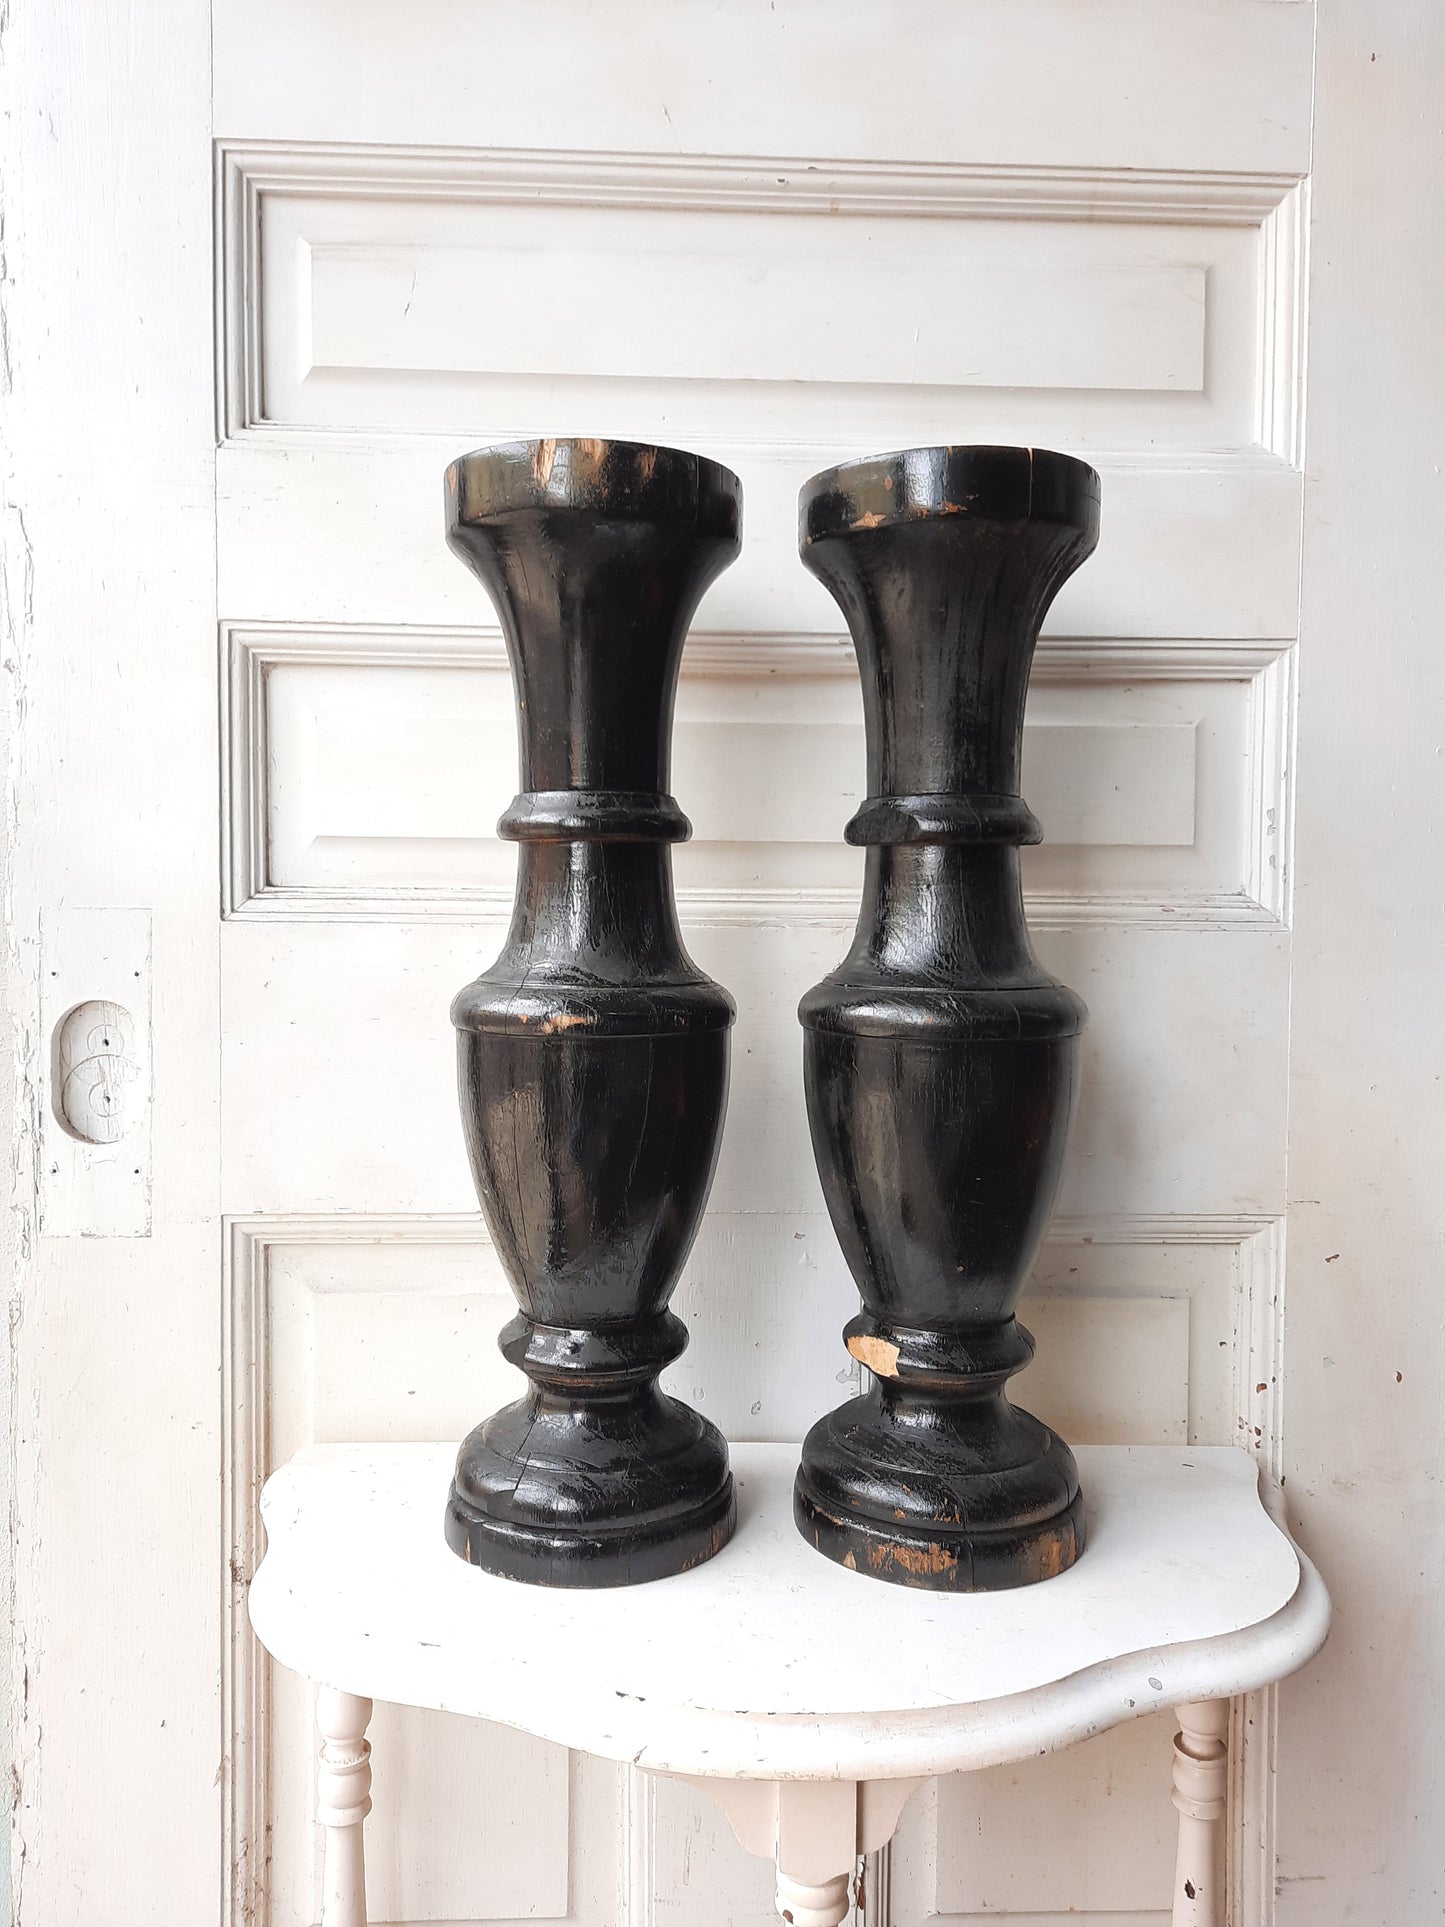 Pair of Large Balusters or Pedestal Bases, Antique Turned Wood Bases